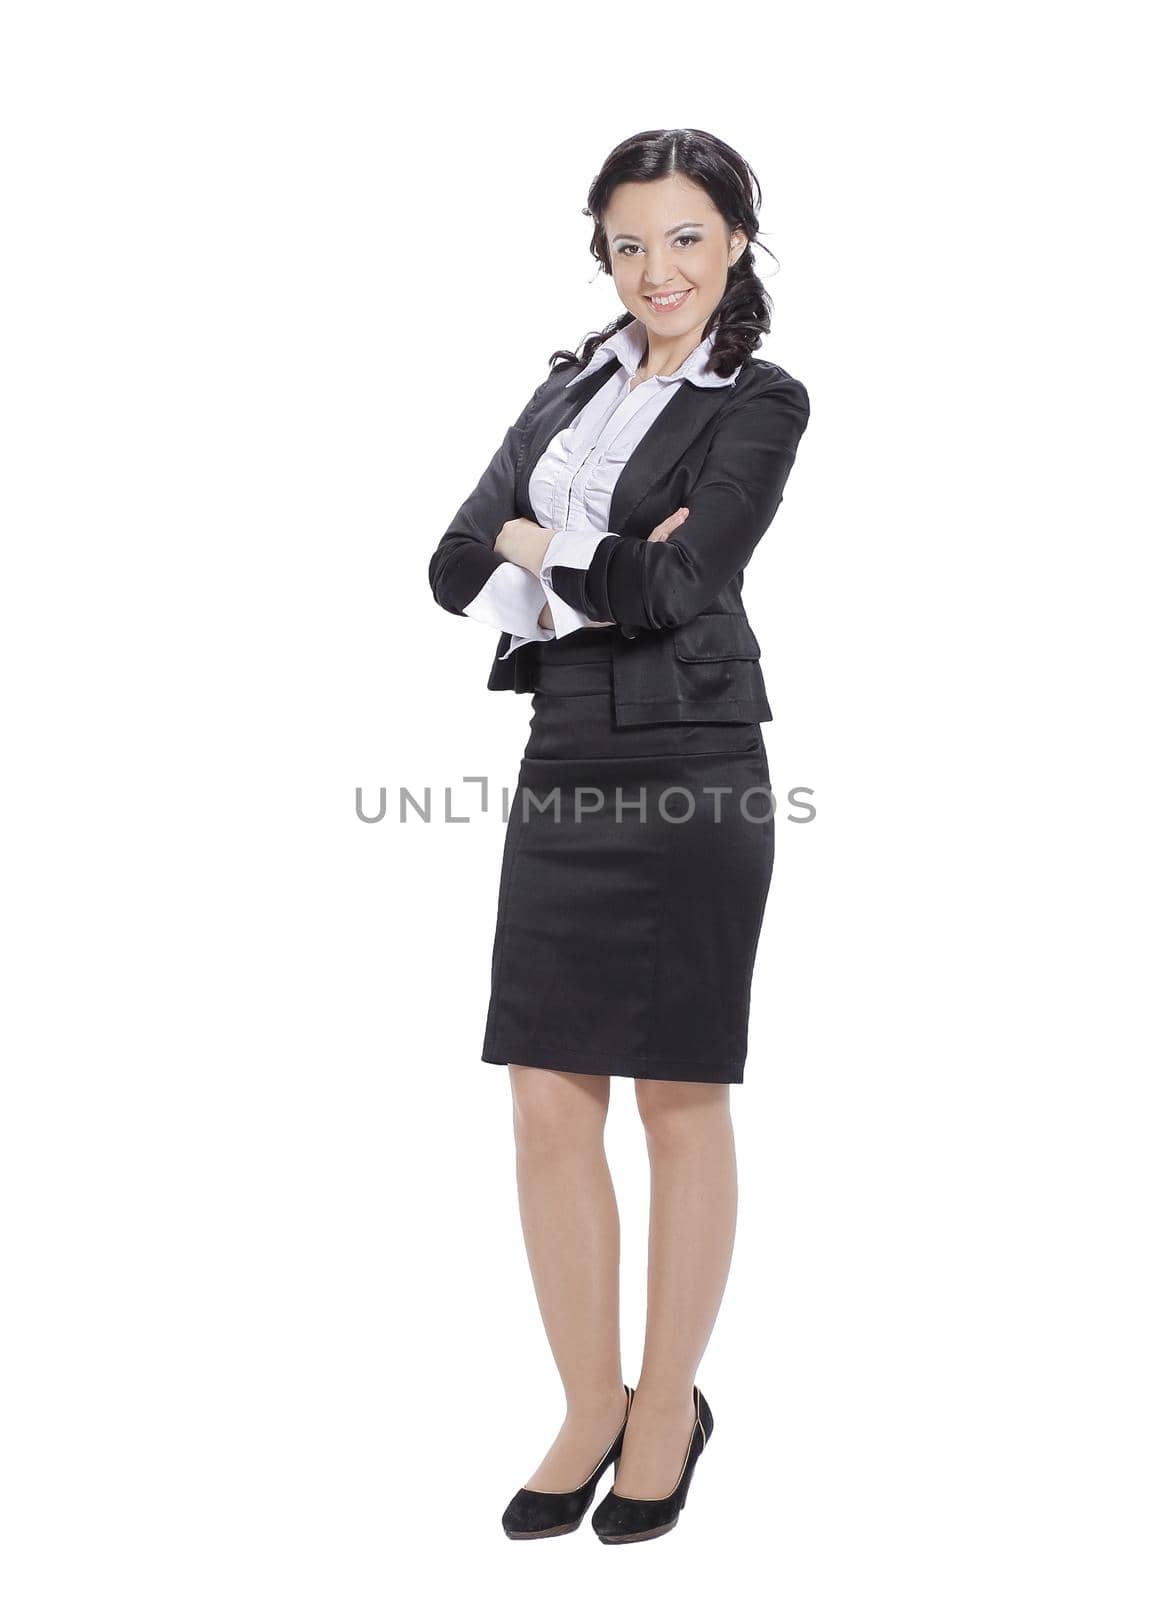 in full growth.portrait of successful business woman.isolated on white.